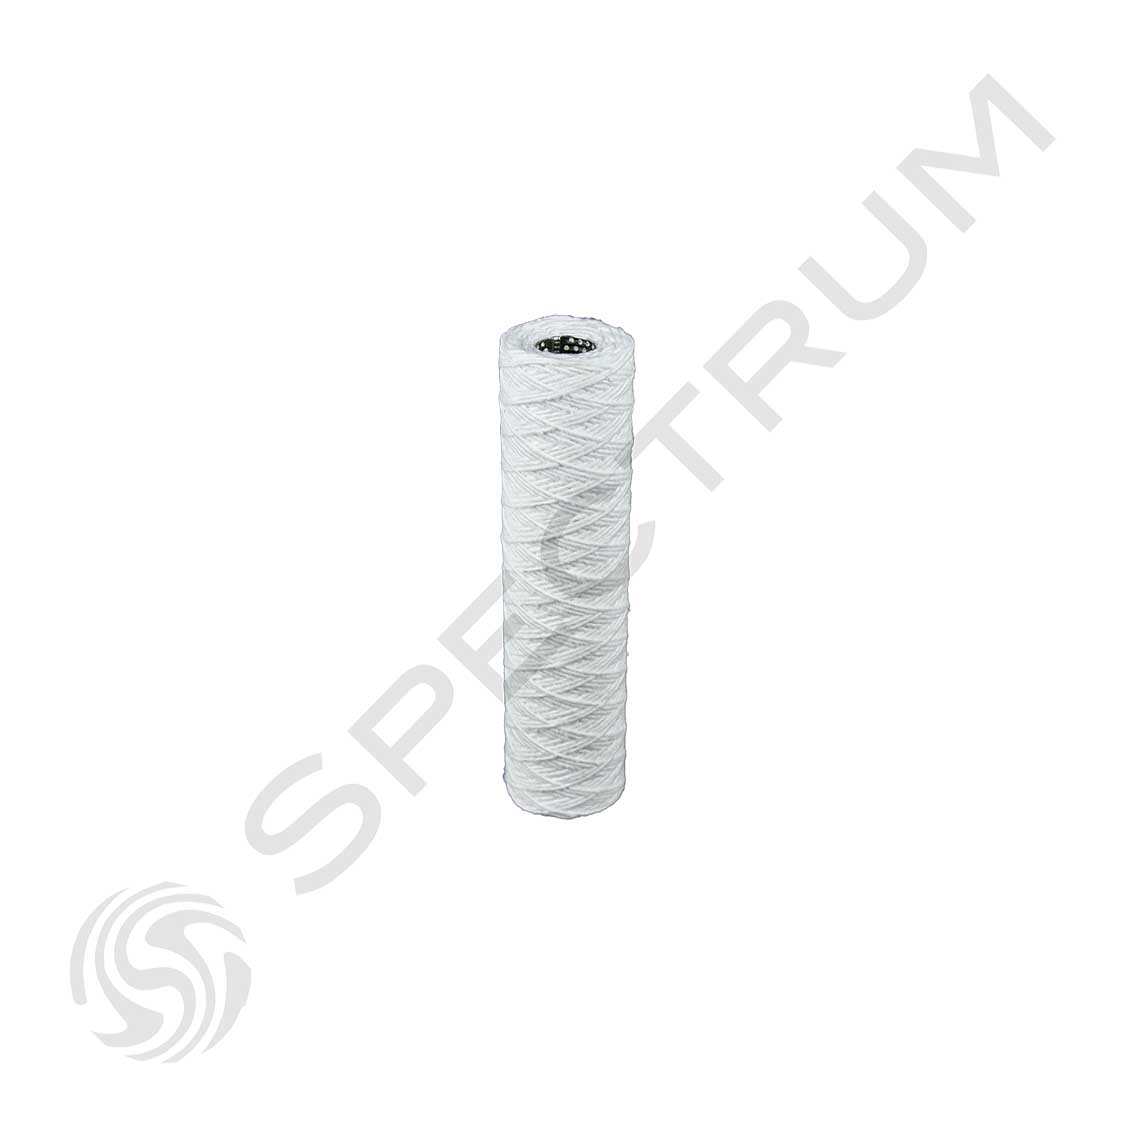 SPECTRUM SWC-100-10 Wound Cotton Filter Cartridge with Stainless Steel Core  100 micron  10